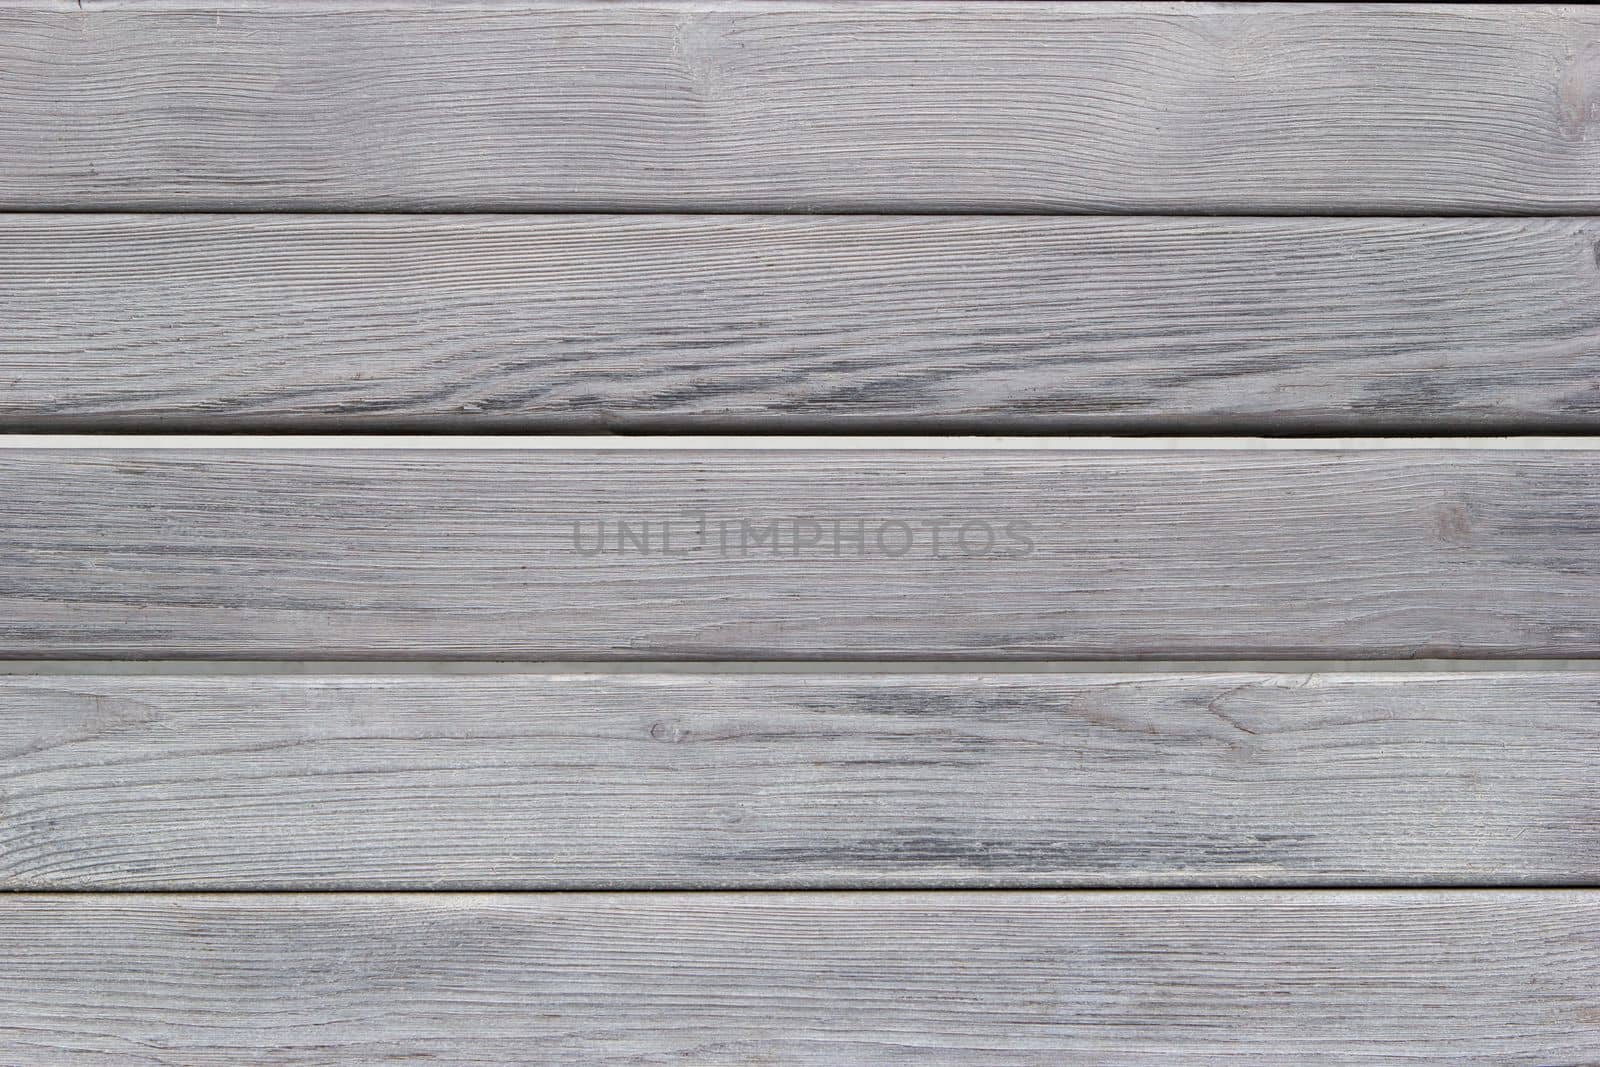 Textured background of gray wooden boards, horizontal lines by Laguna781